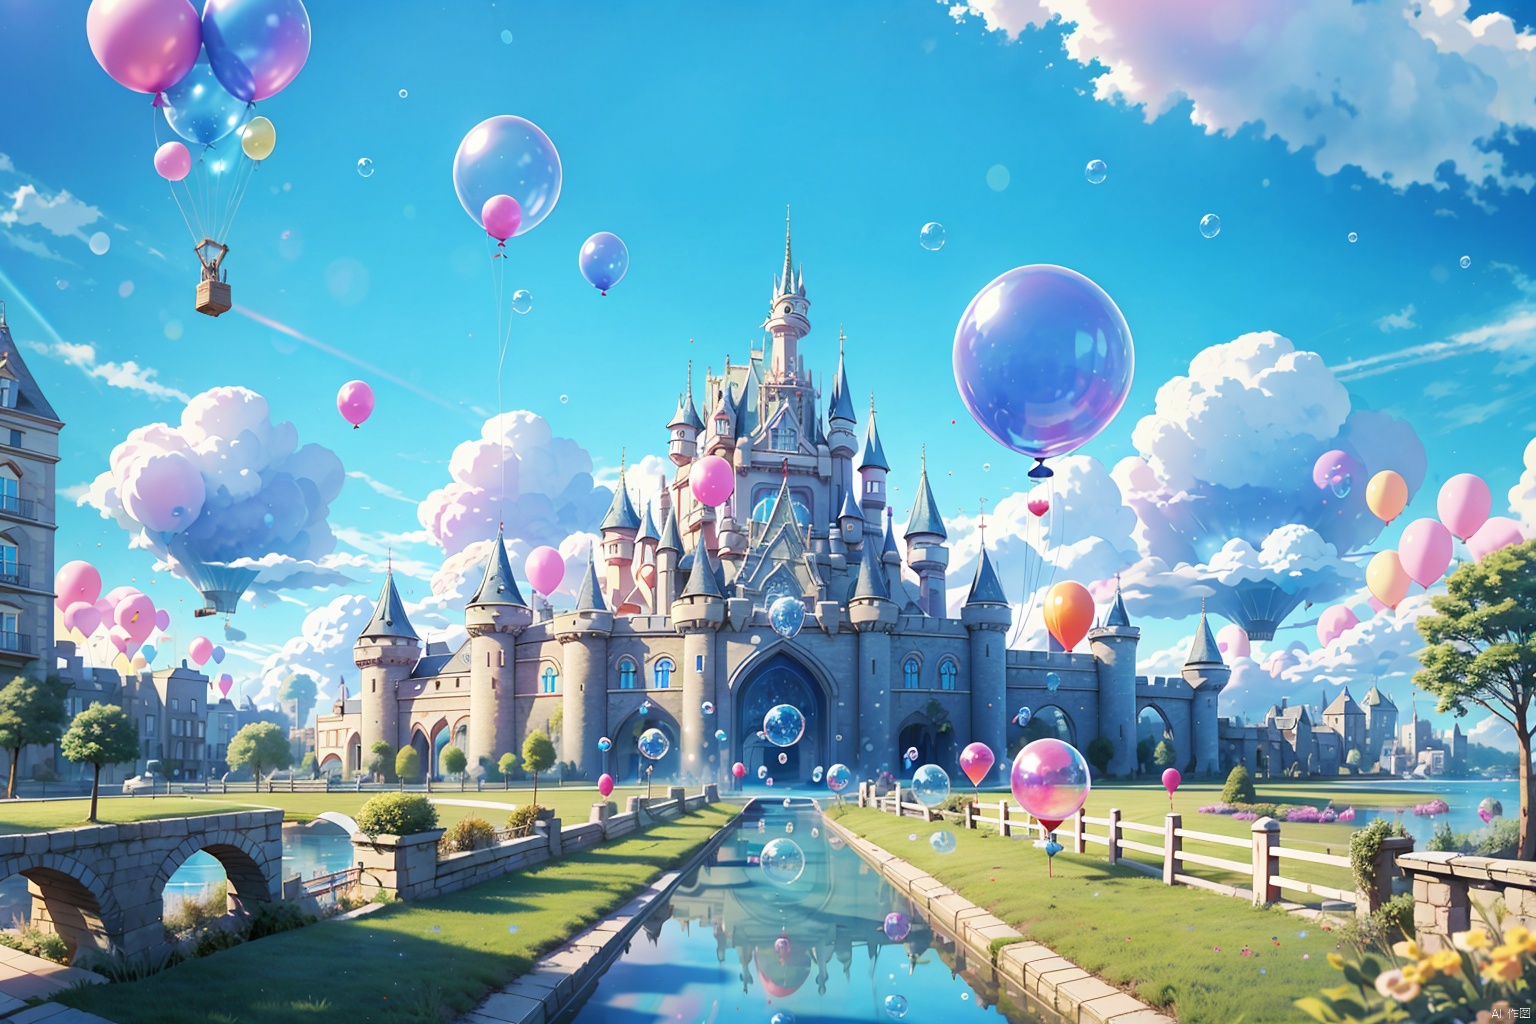  a cartoon scene of a castle surrounded by balloons and a pathway leading to it with a castle in the distance, ball, balloon, blue sky, bubble, bubble blowing, cloud, cloudy sky, day, lens flare, outdoors, scenery, sky, sun